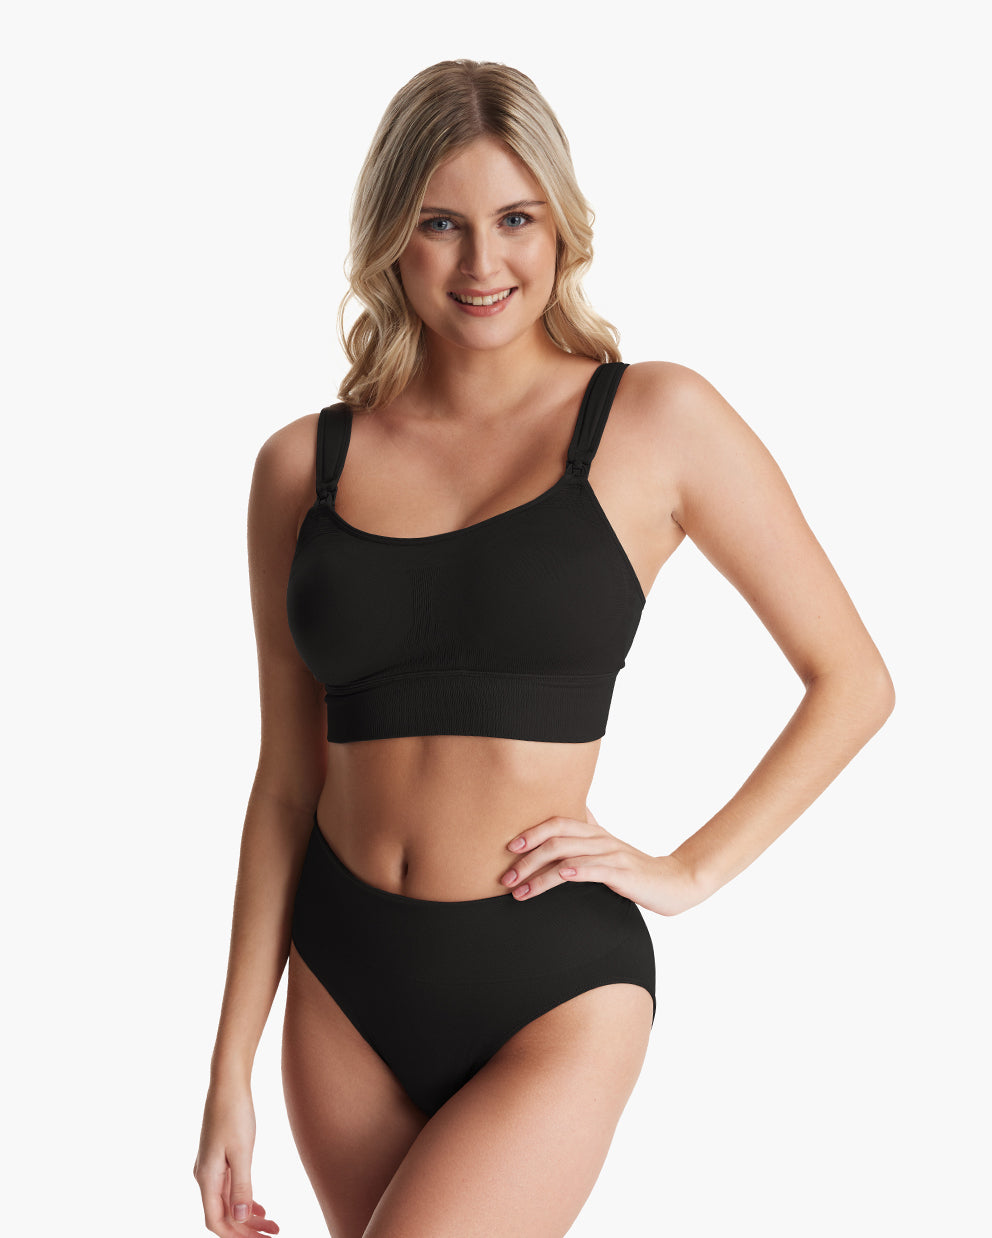 Flexi - All-in-One Super Flexible Pumping Bra Super Soft and Comfortable